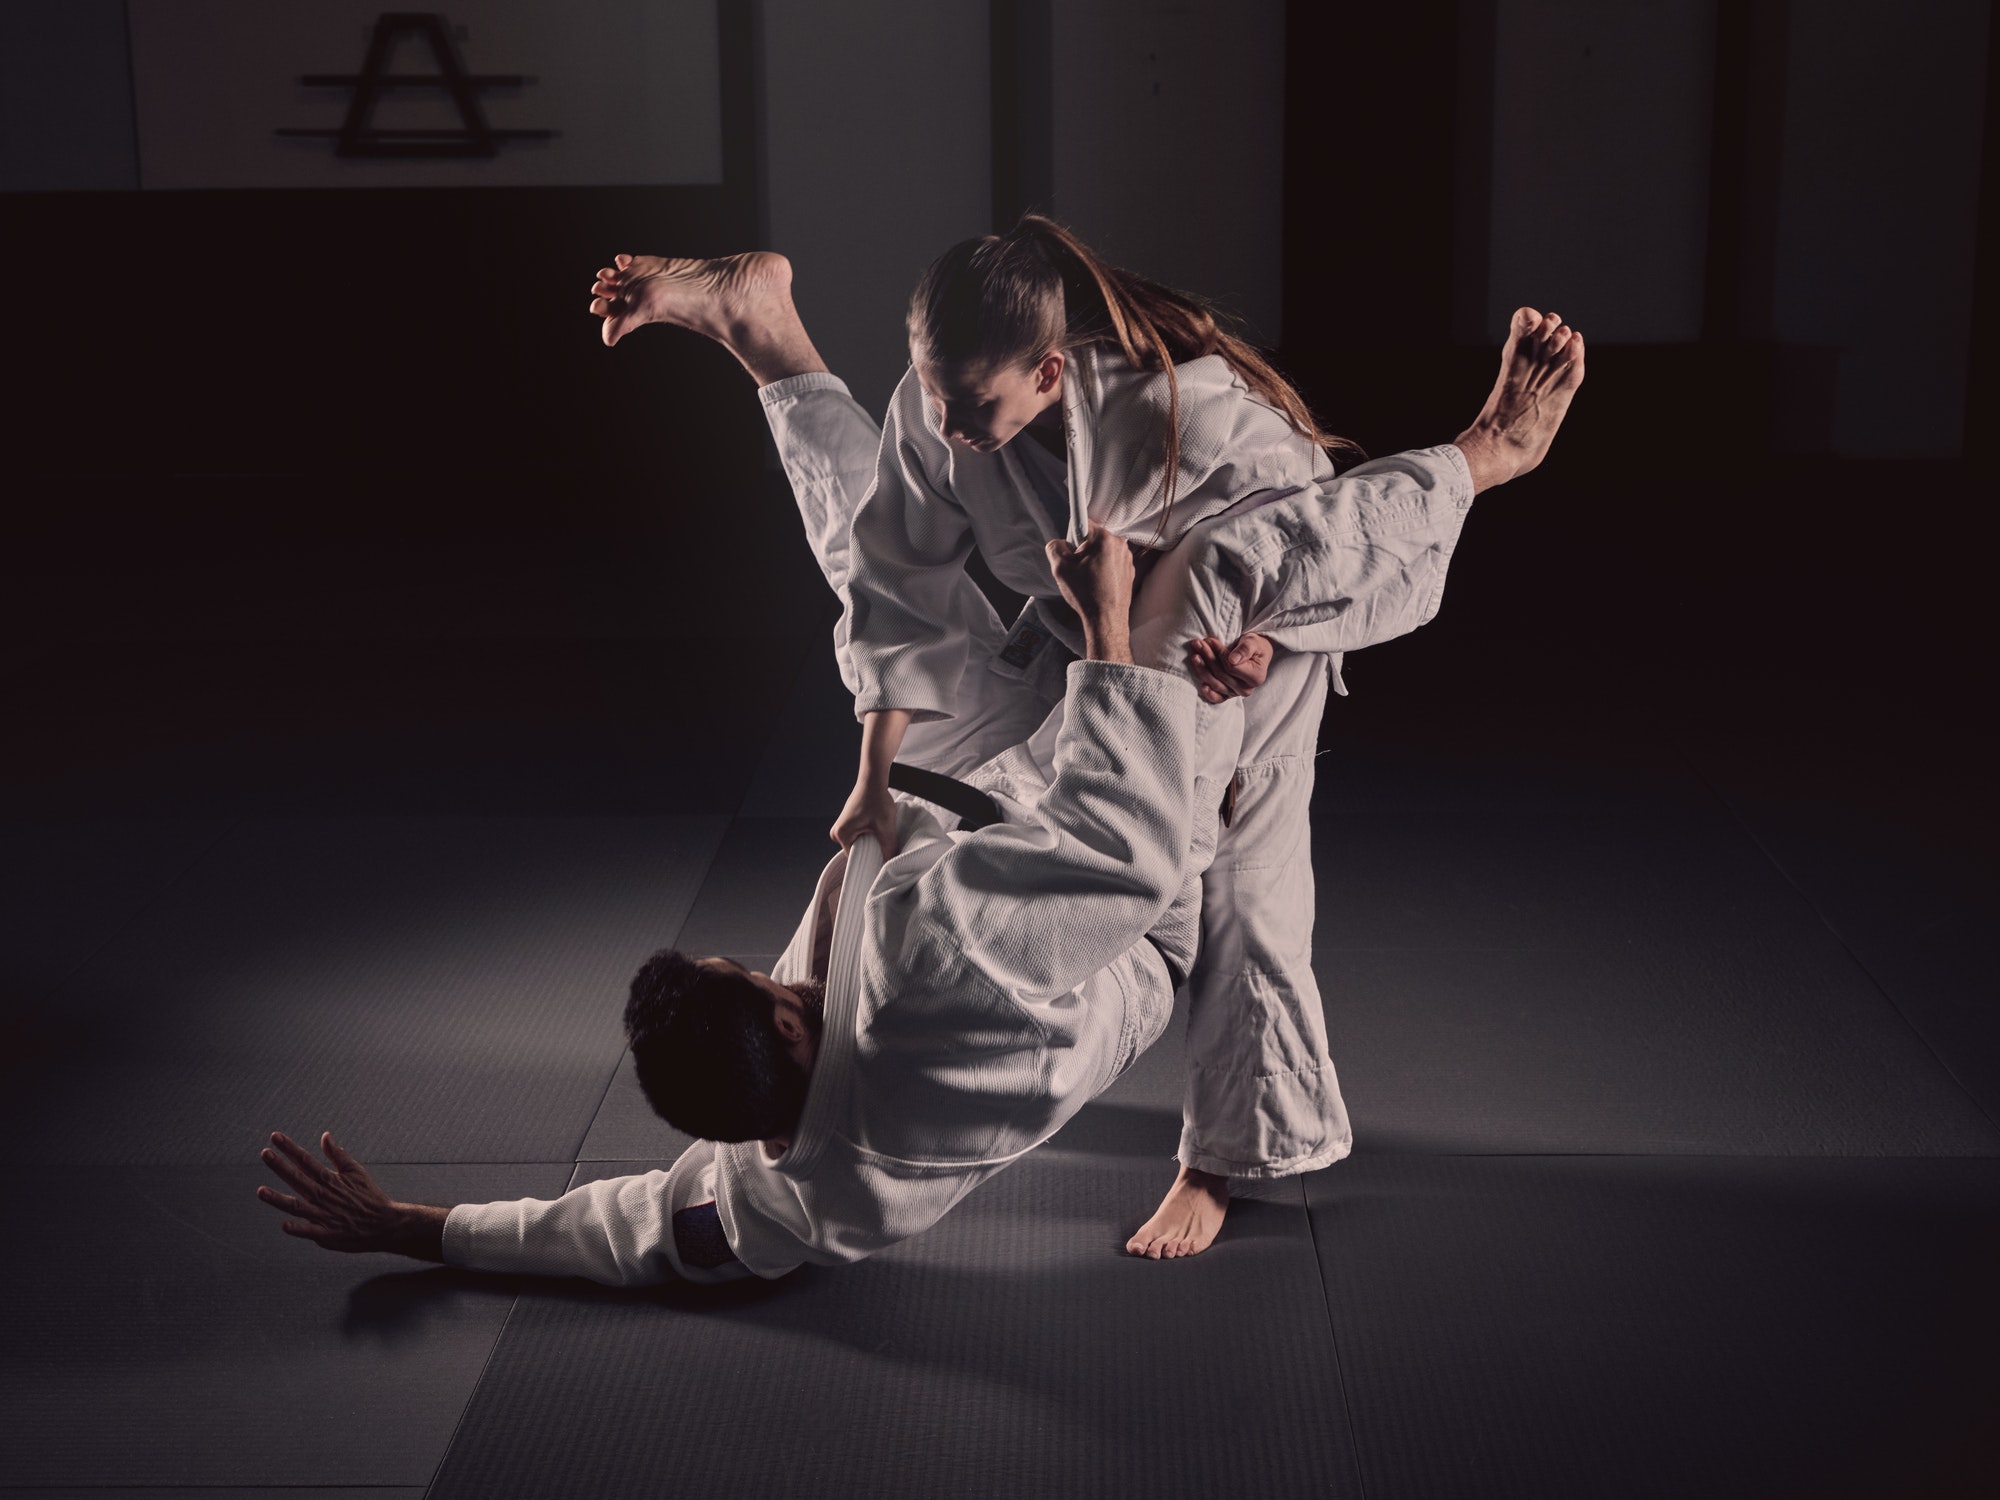 Woman practicing martial arts with man